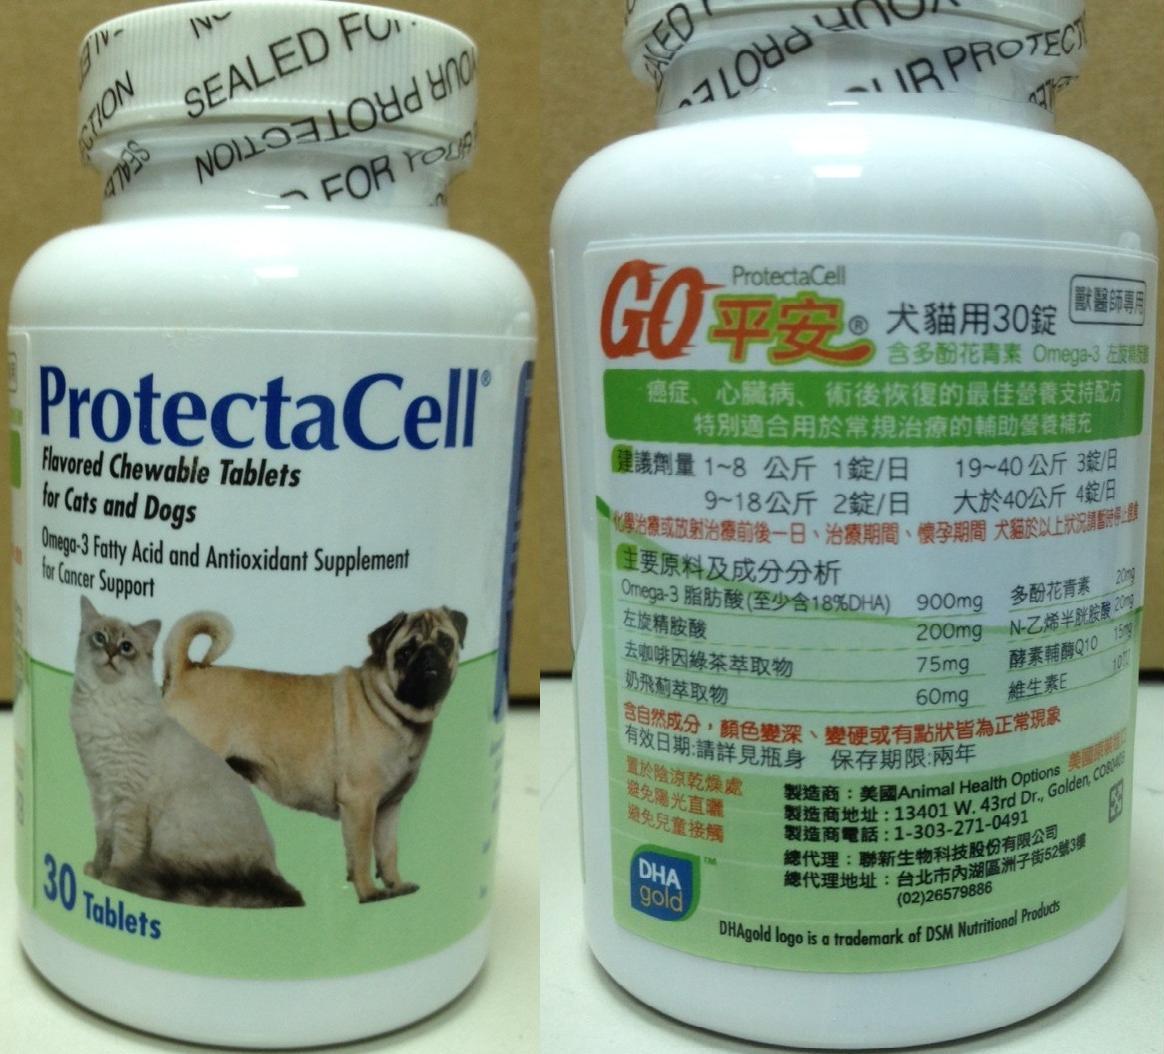 Go平安 ( 犬貓用 )
ProtectaCell